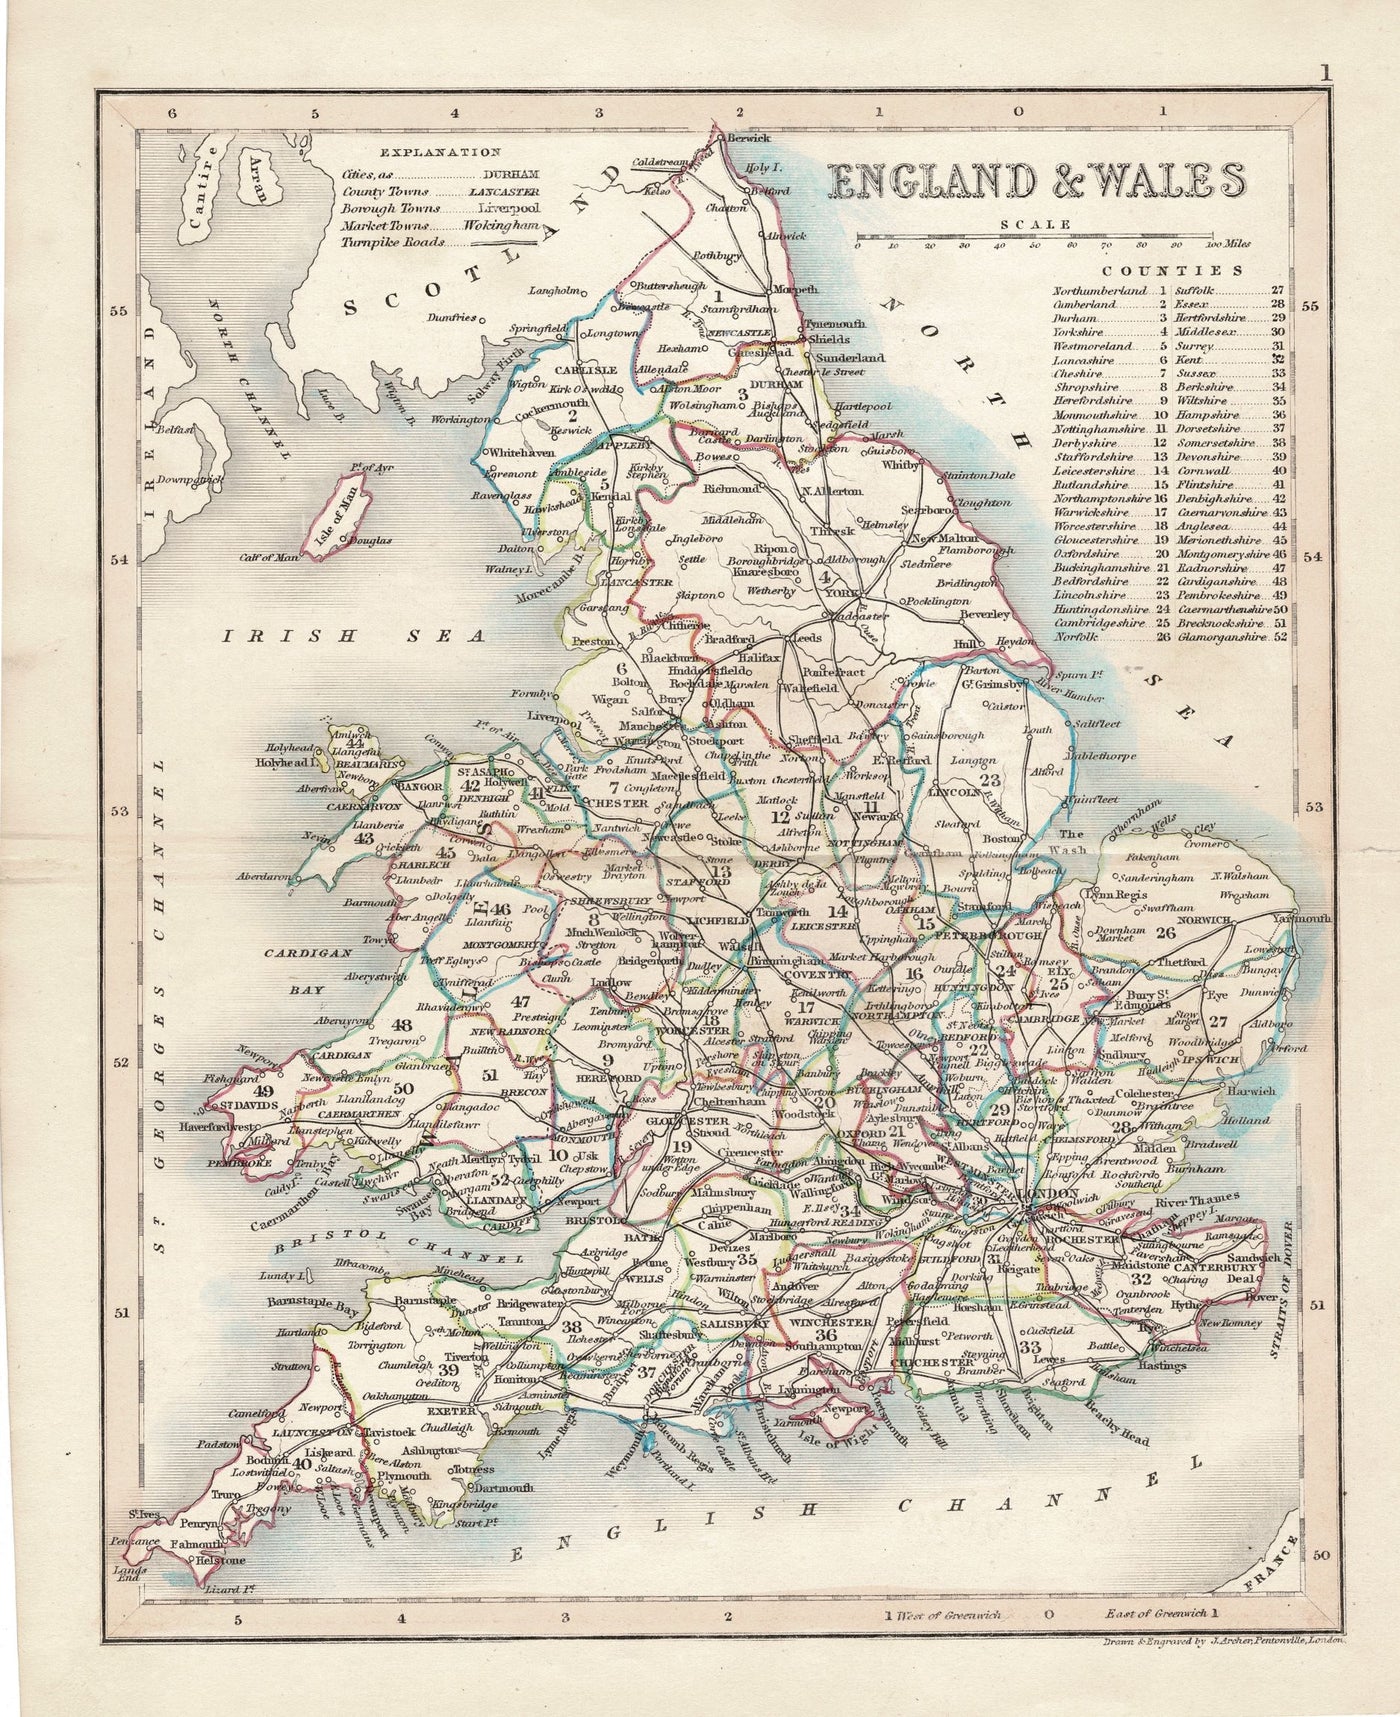 England and Wales counties antique map published 1845